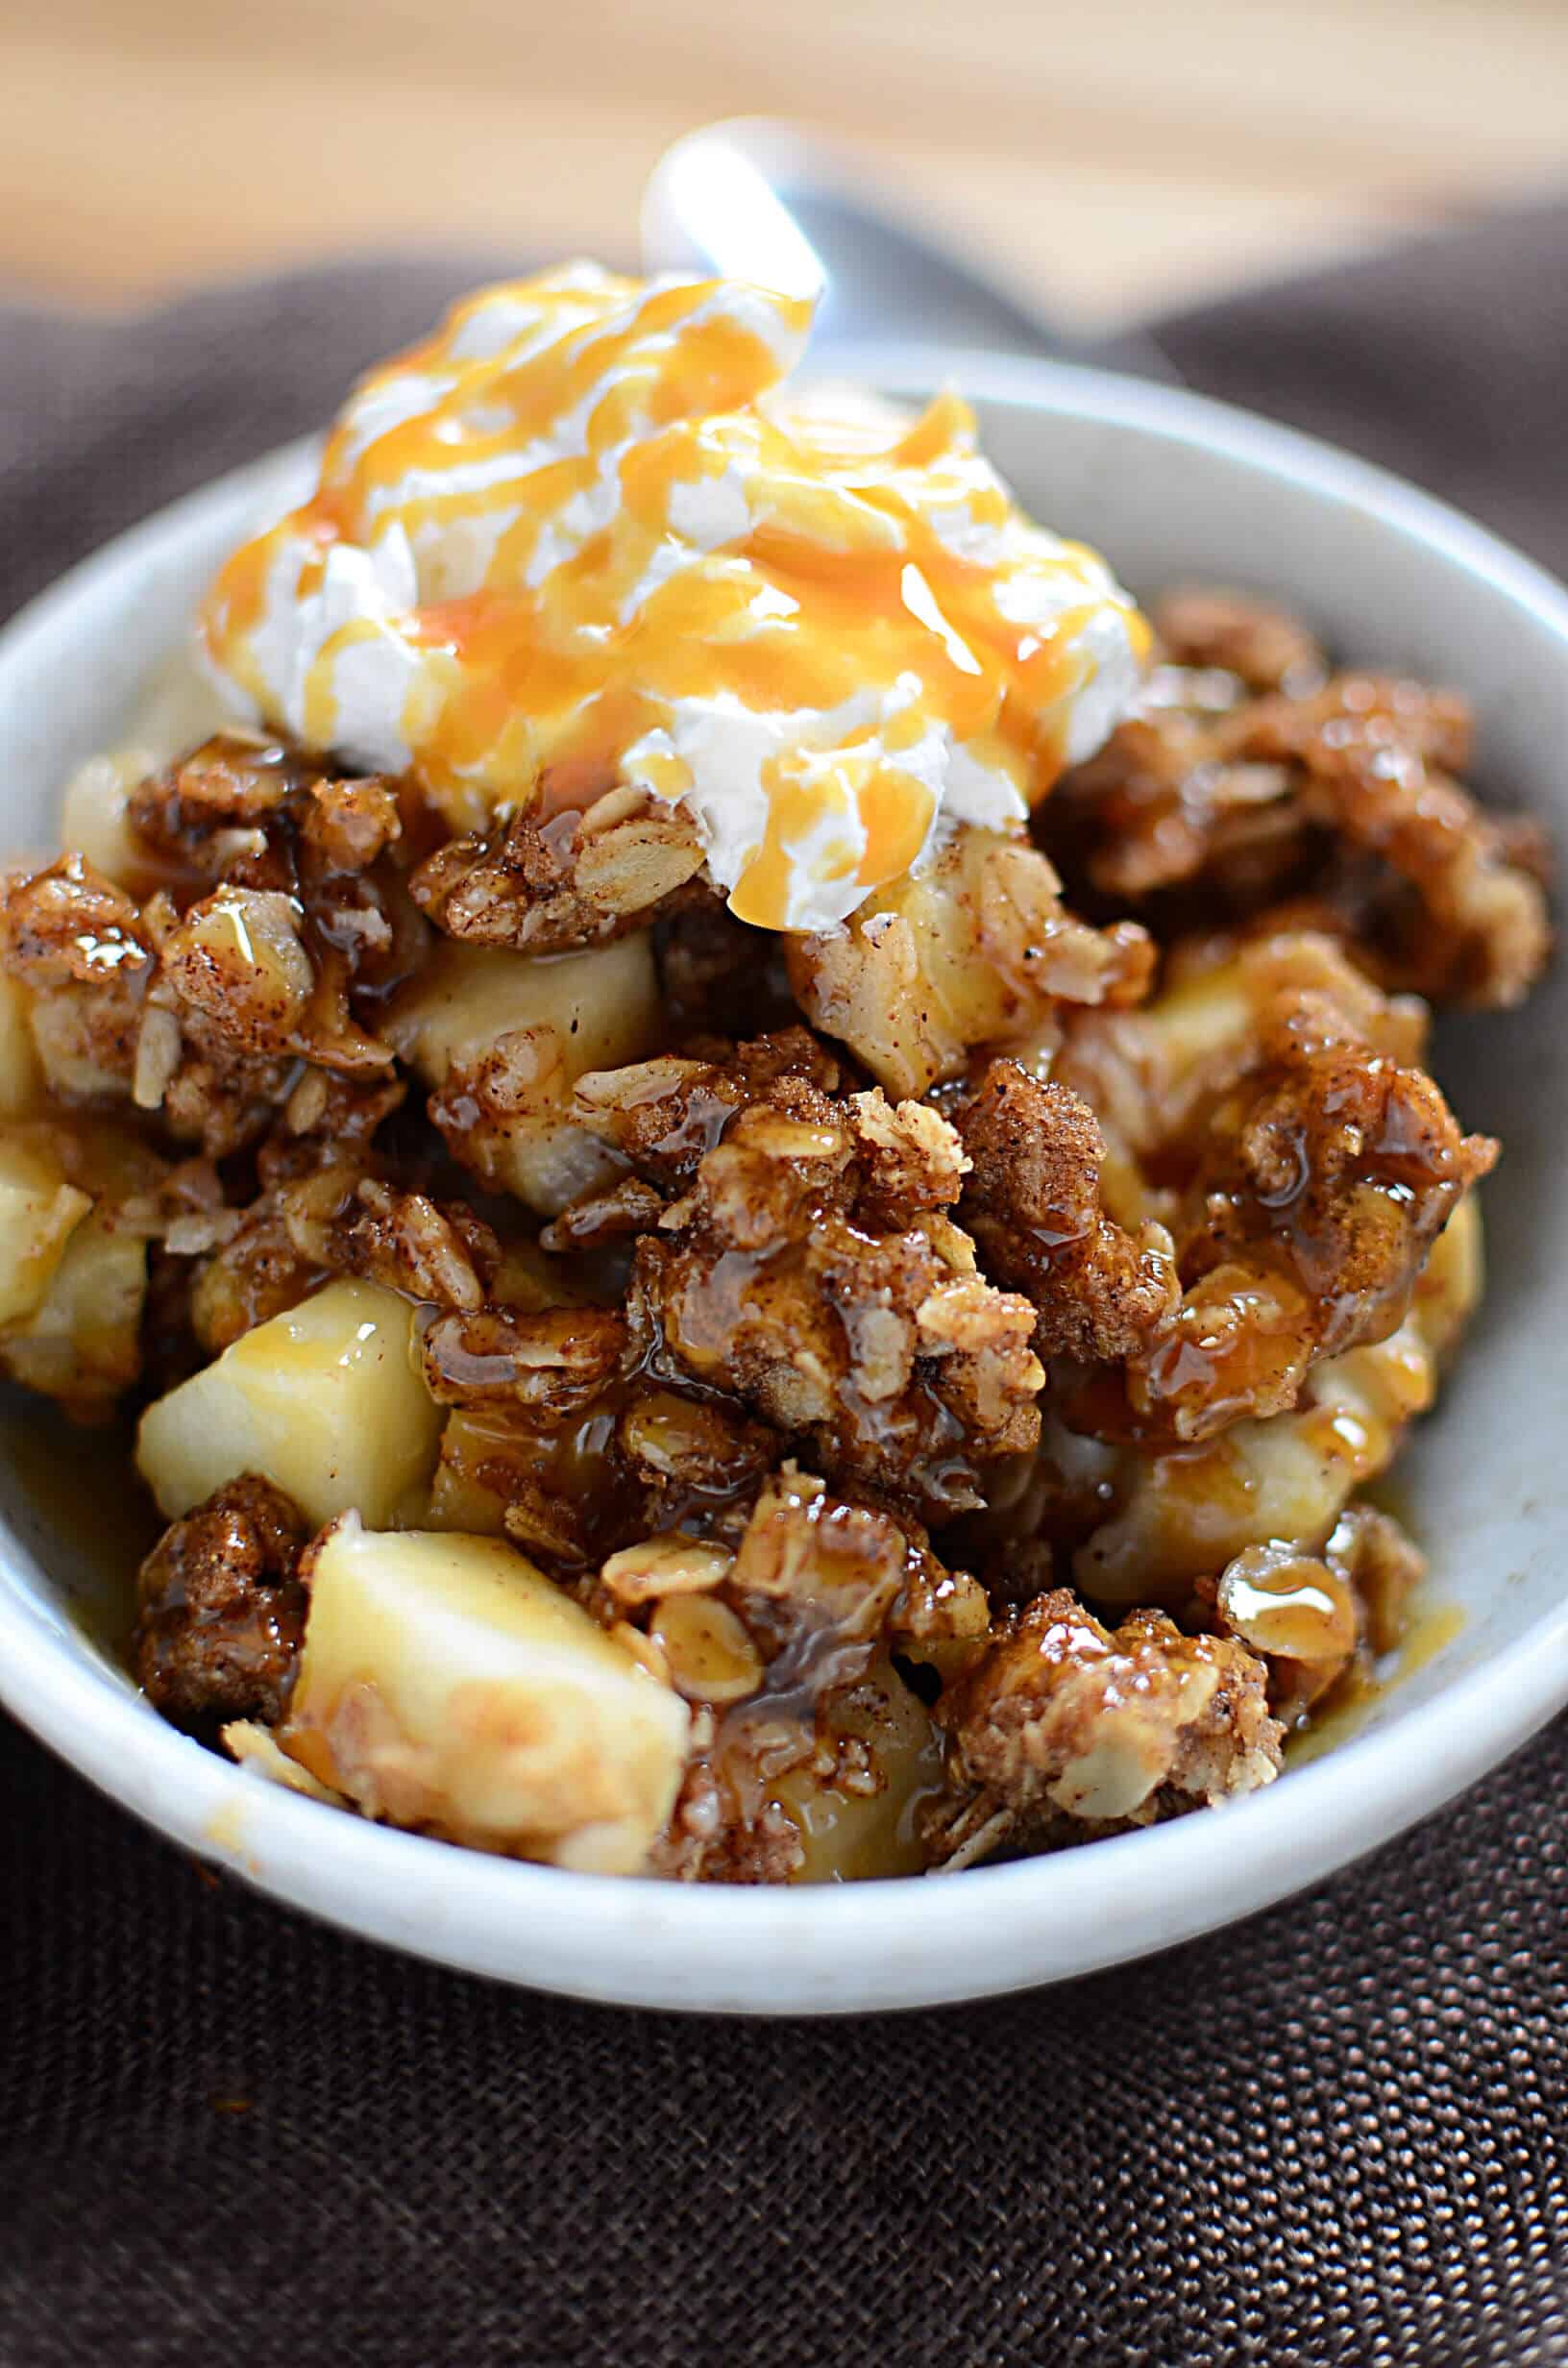 Spiced apple crisp with caramel drizzled on top in a white bowl with whipped topping